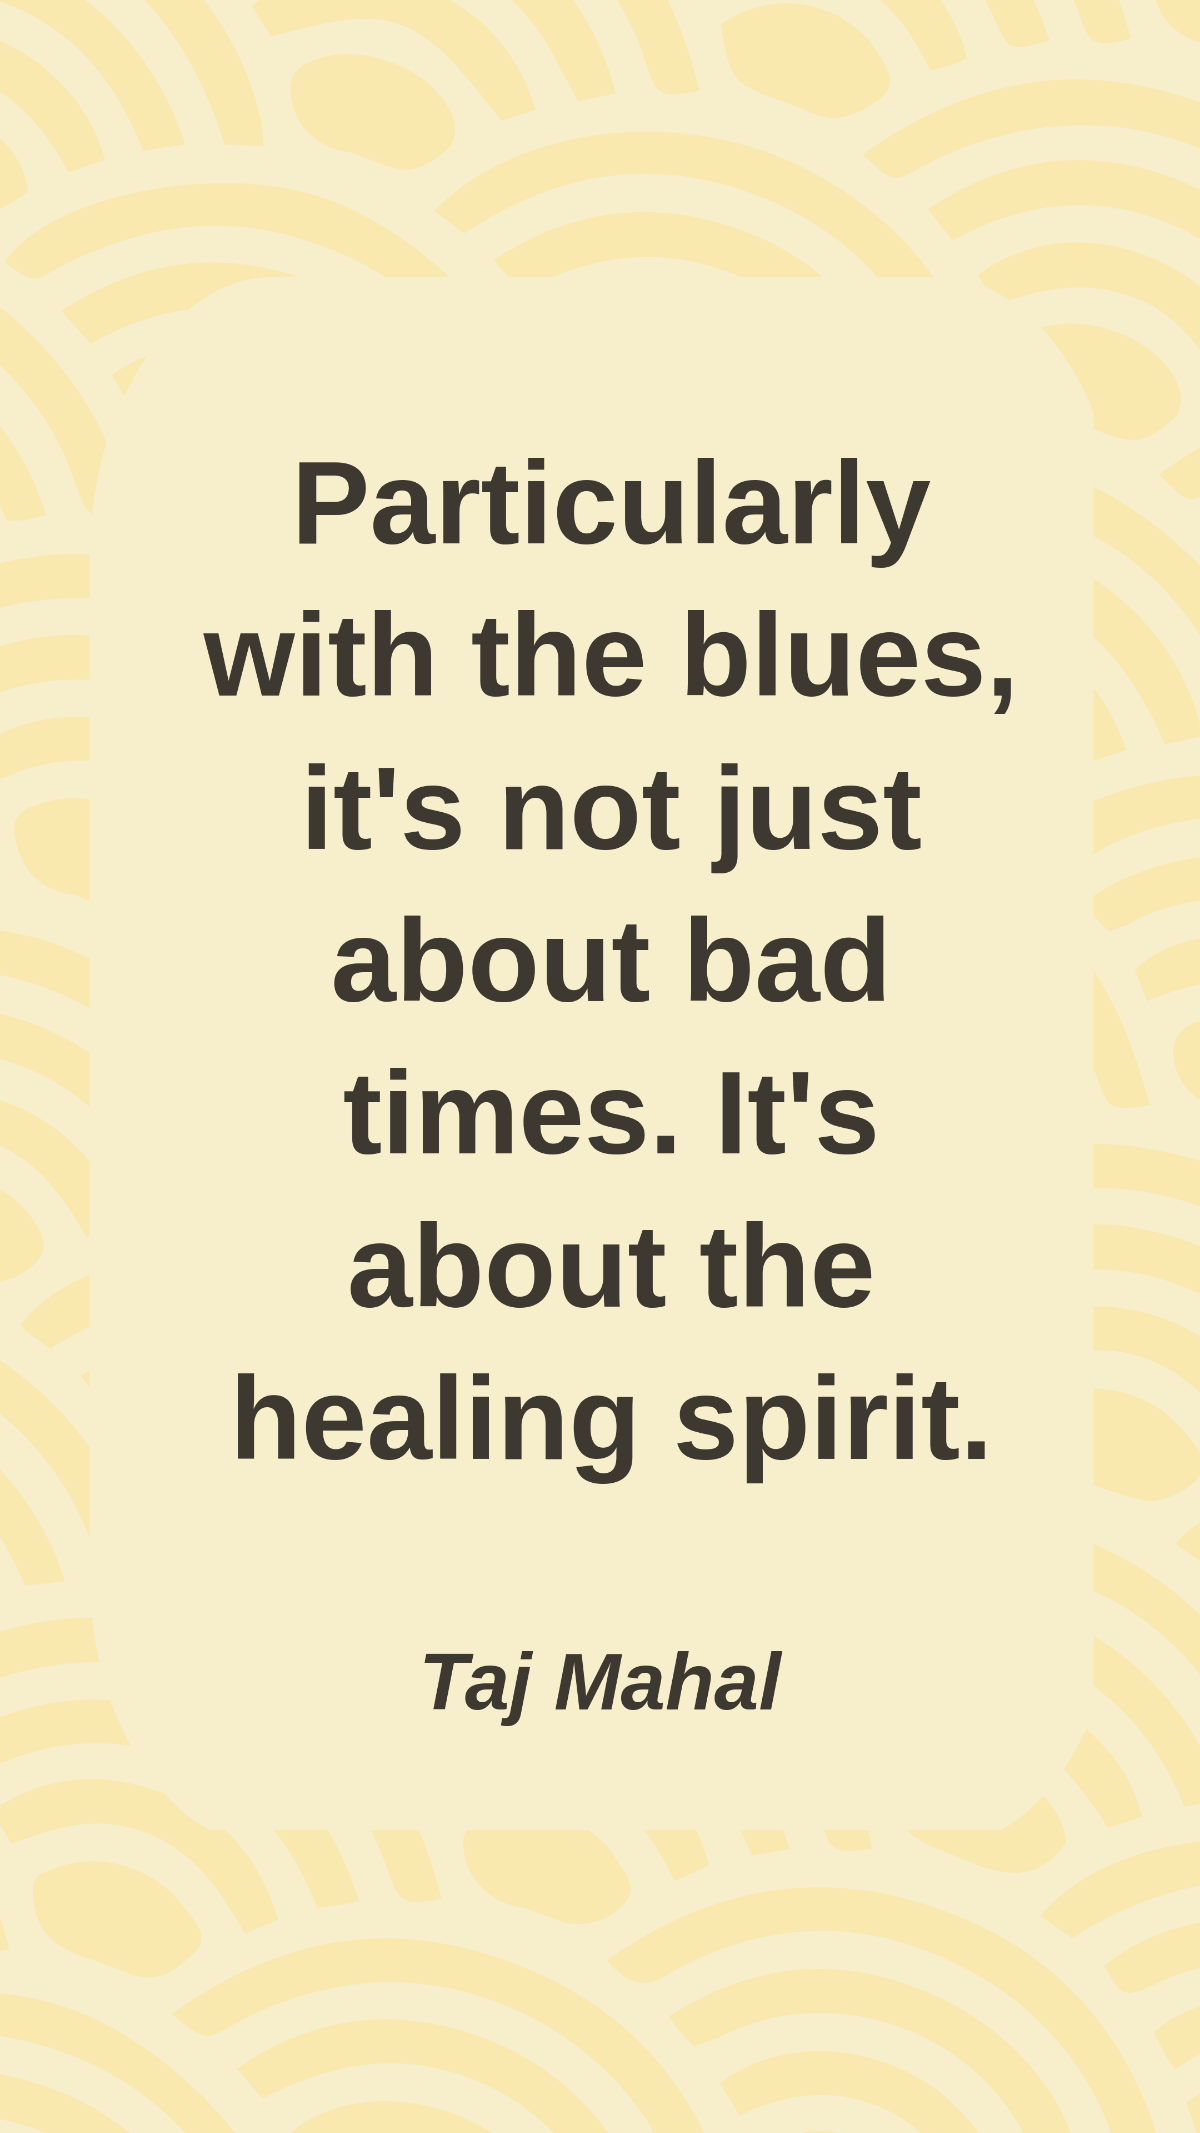 Free Taj Mahal - Particularly with the blues, it's not just about bad times. It's about the healing spirit. Template